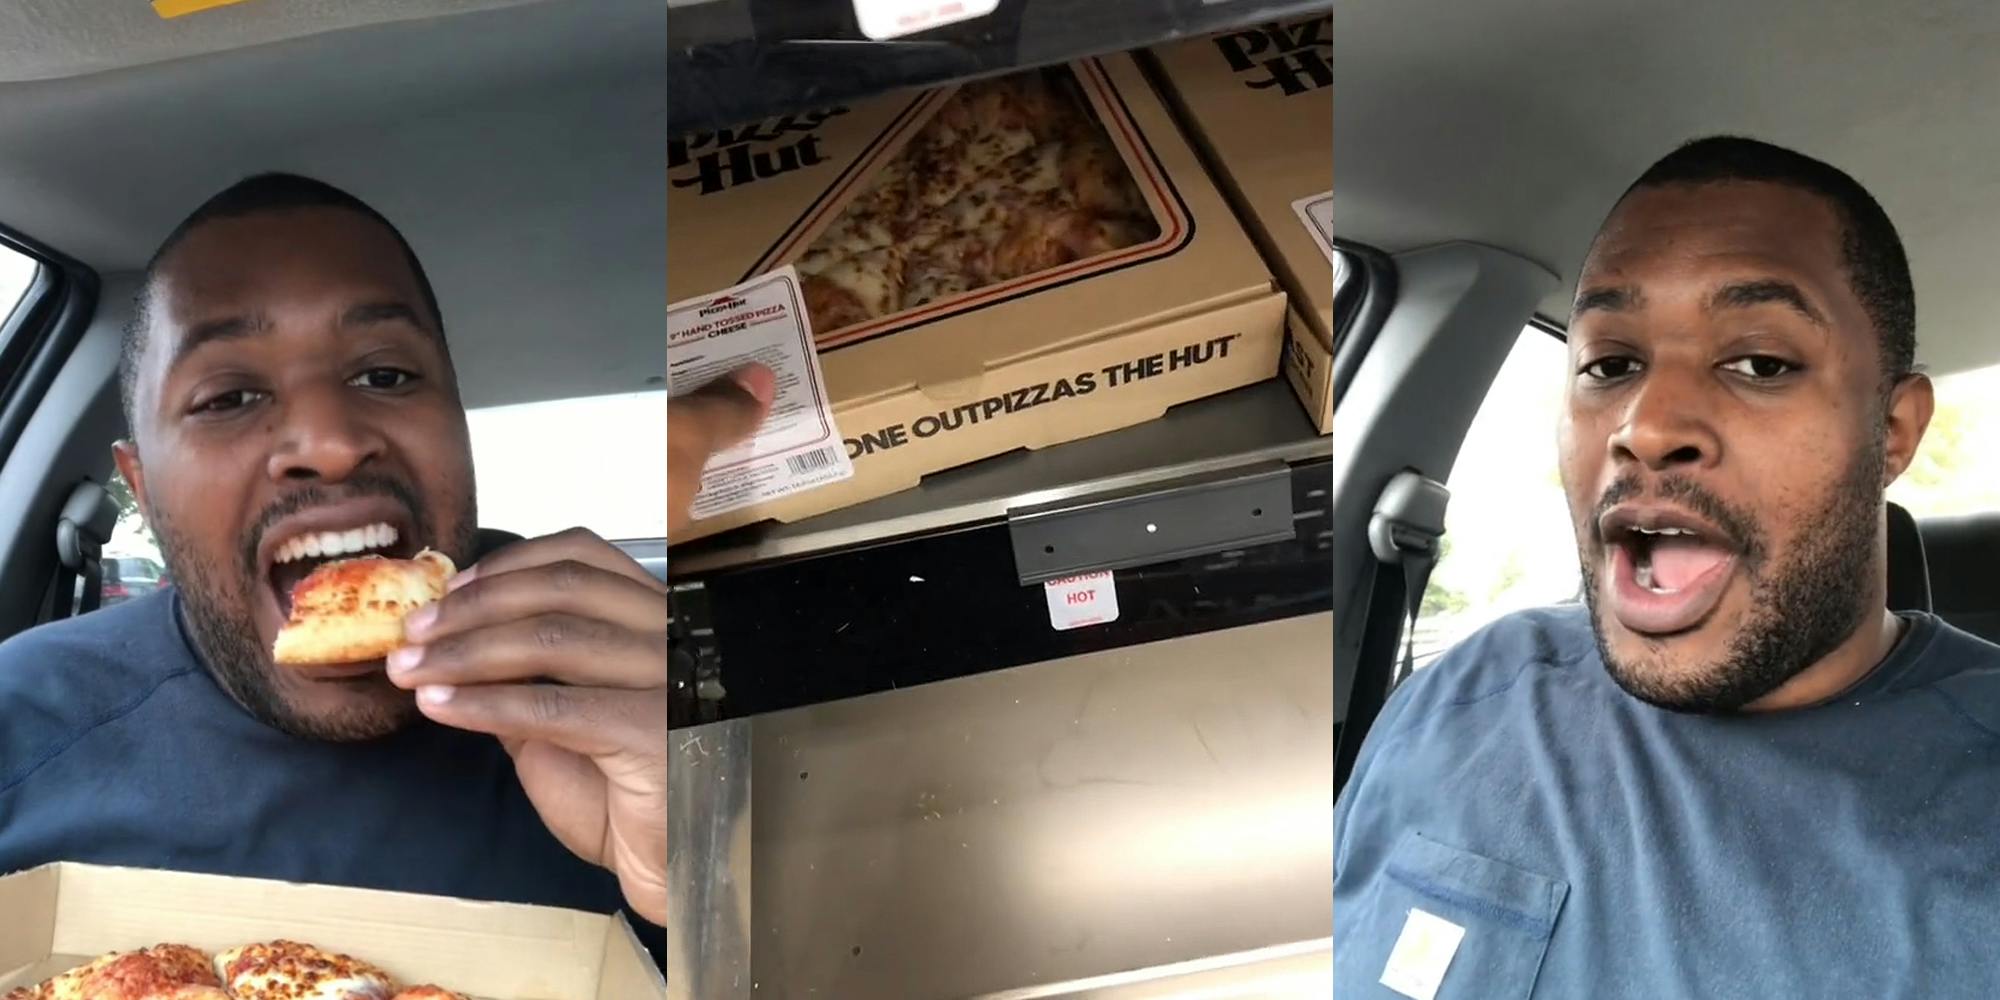 man sitting in car taking bite out of pizza with pizza box in front (l) man grabbing Pizza Hut personal pizza from Target (c) Man speaking in car (r)